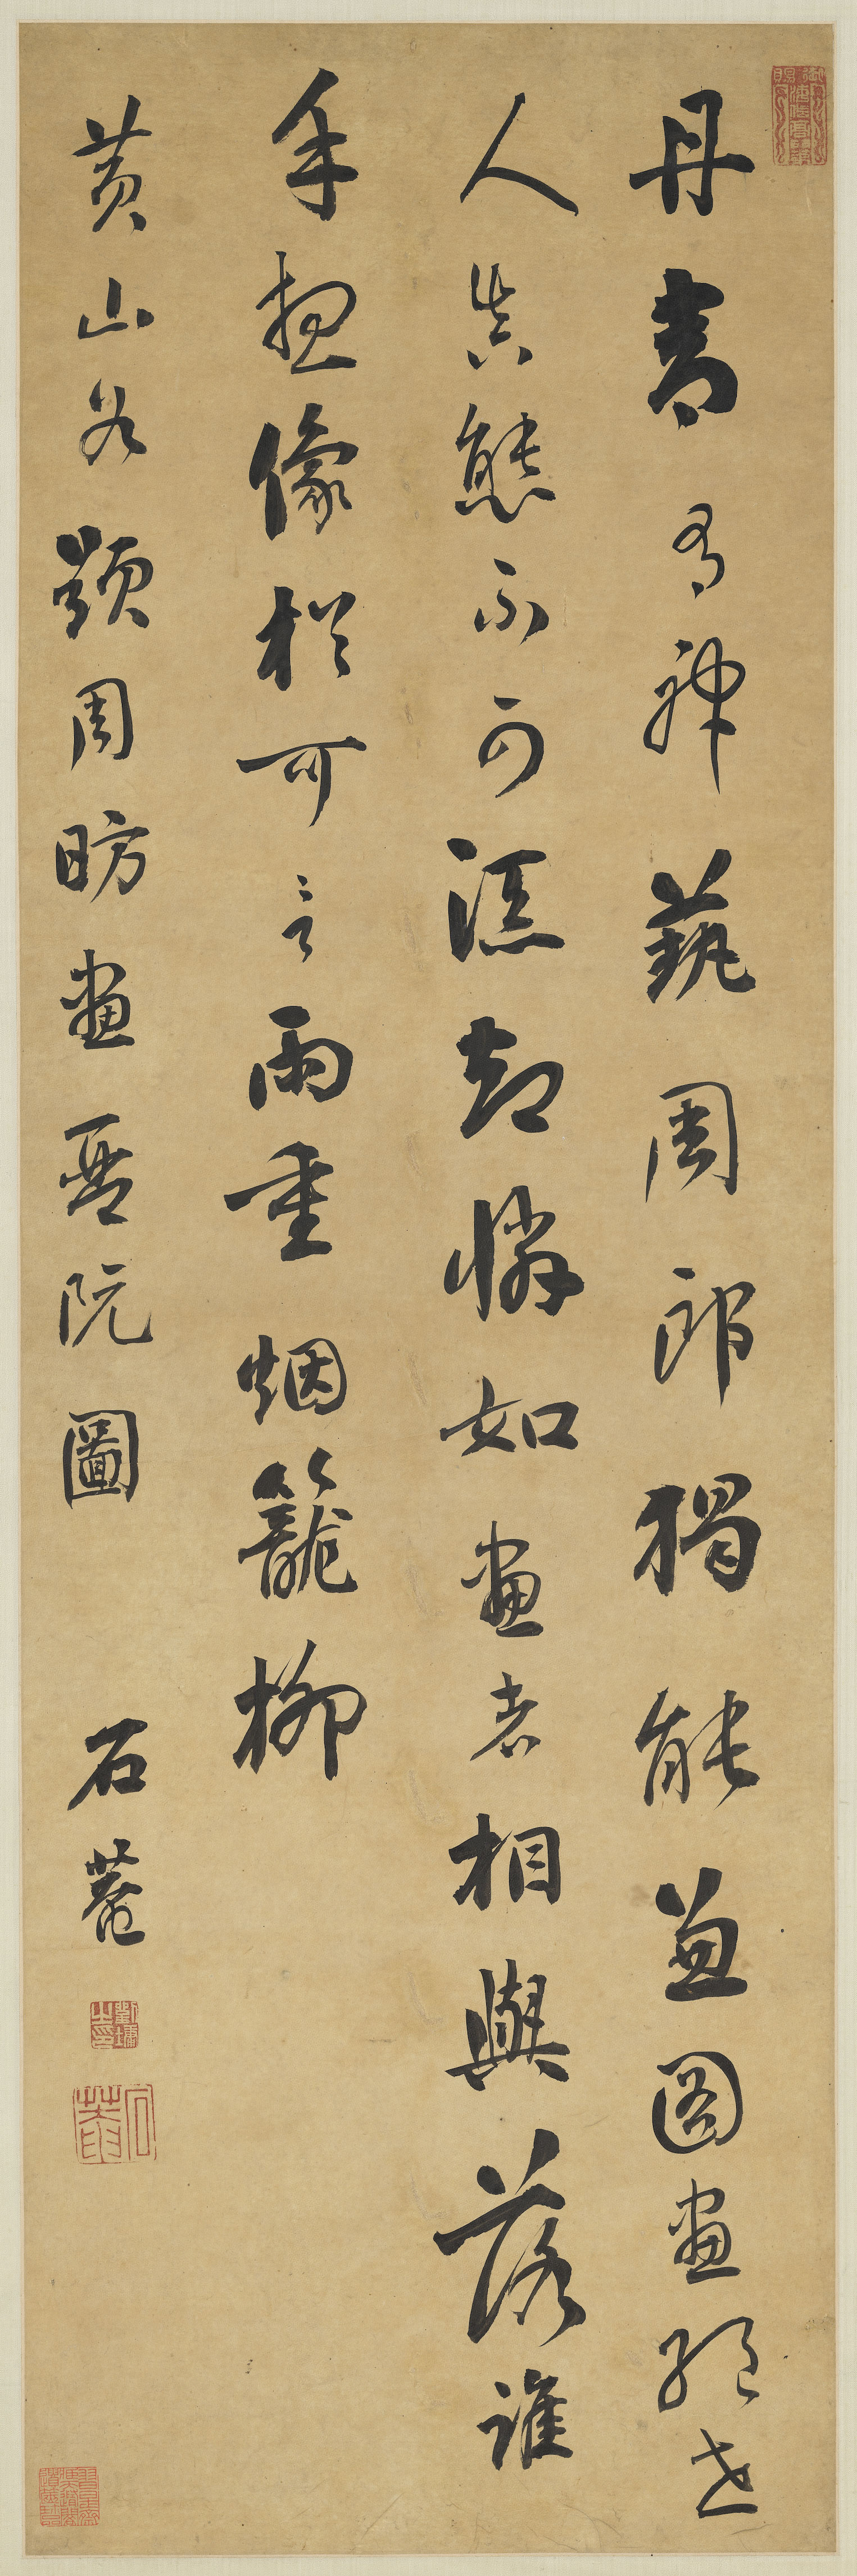 Copy of Huang Tingjian's Inscription for "Playing a Zither" Painted by Zhou Fang